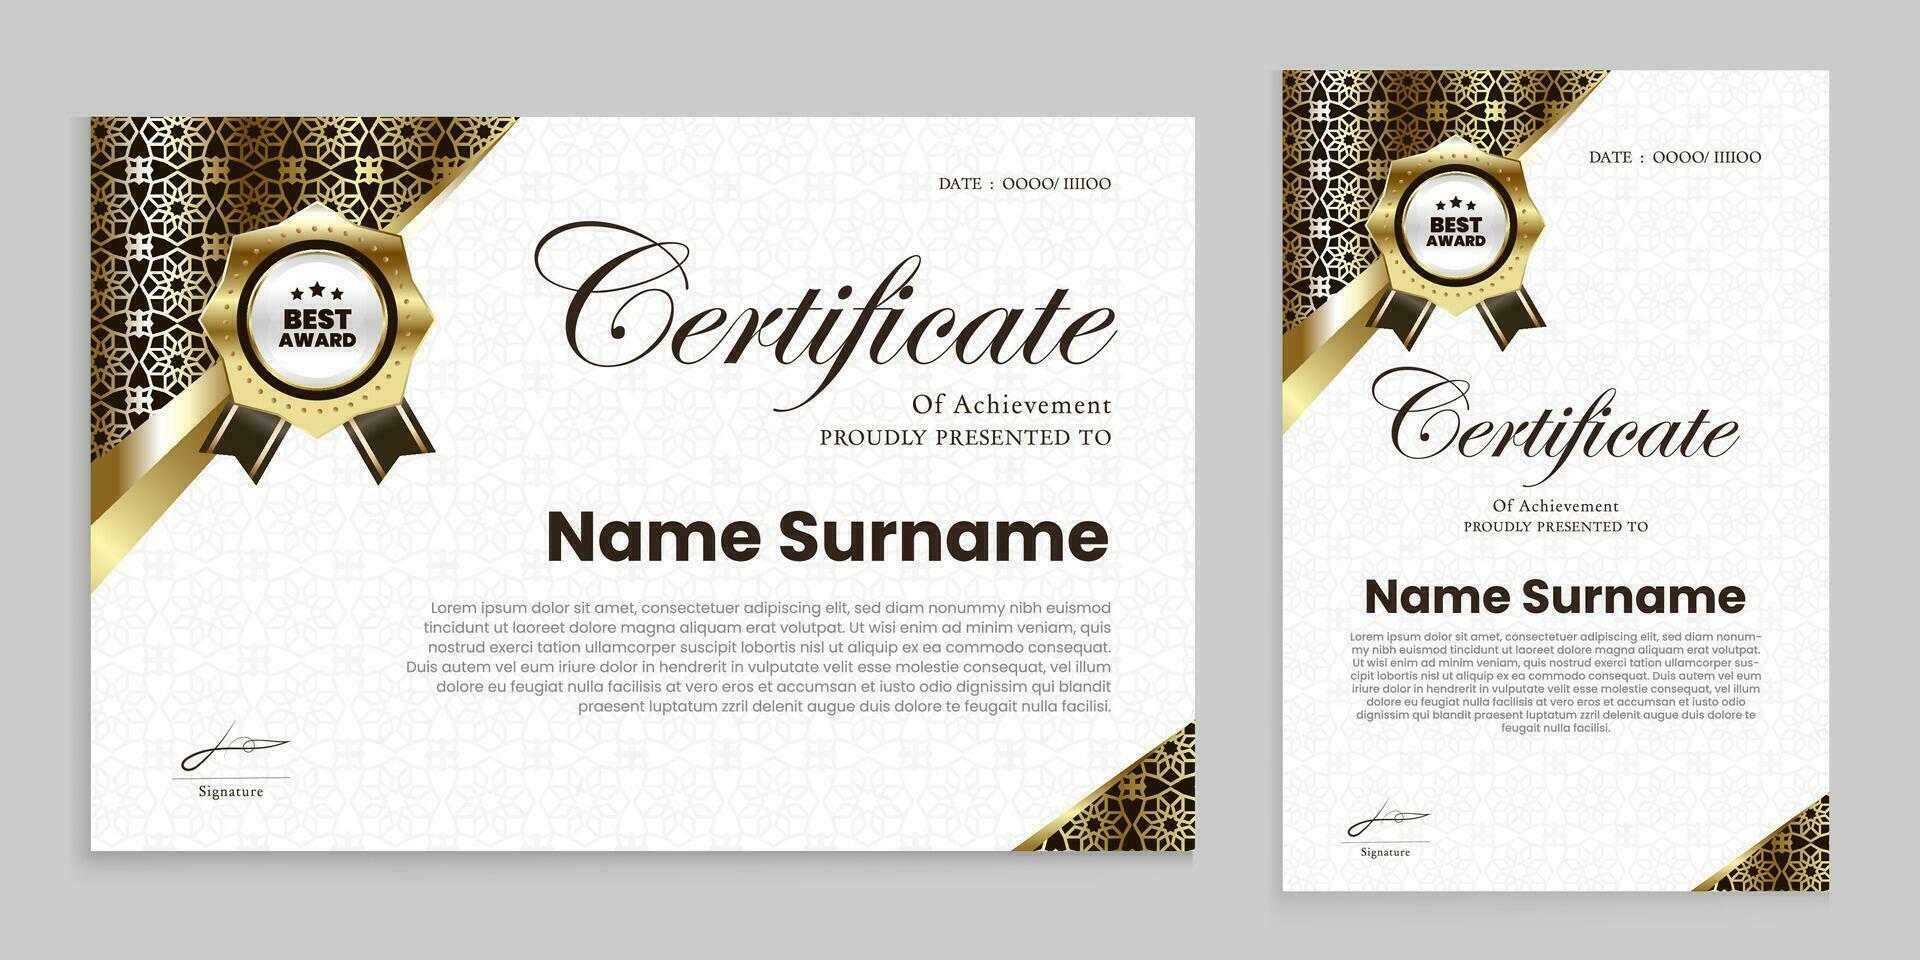 Award or appreciation certificate template. Gold and brown background, suitable for traditional, vintage themes. vector